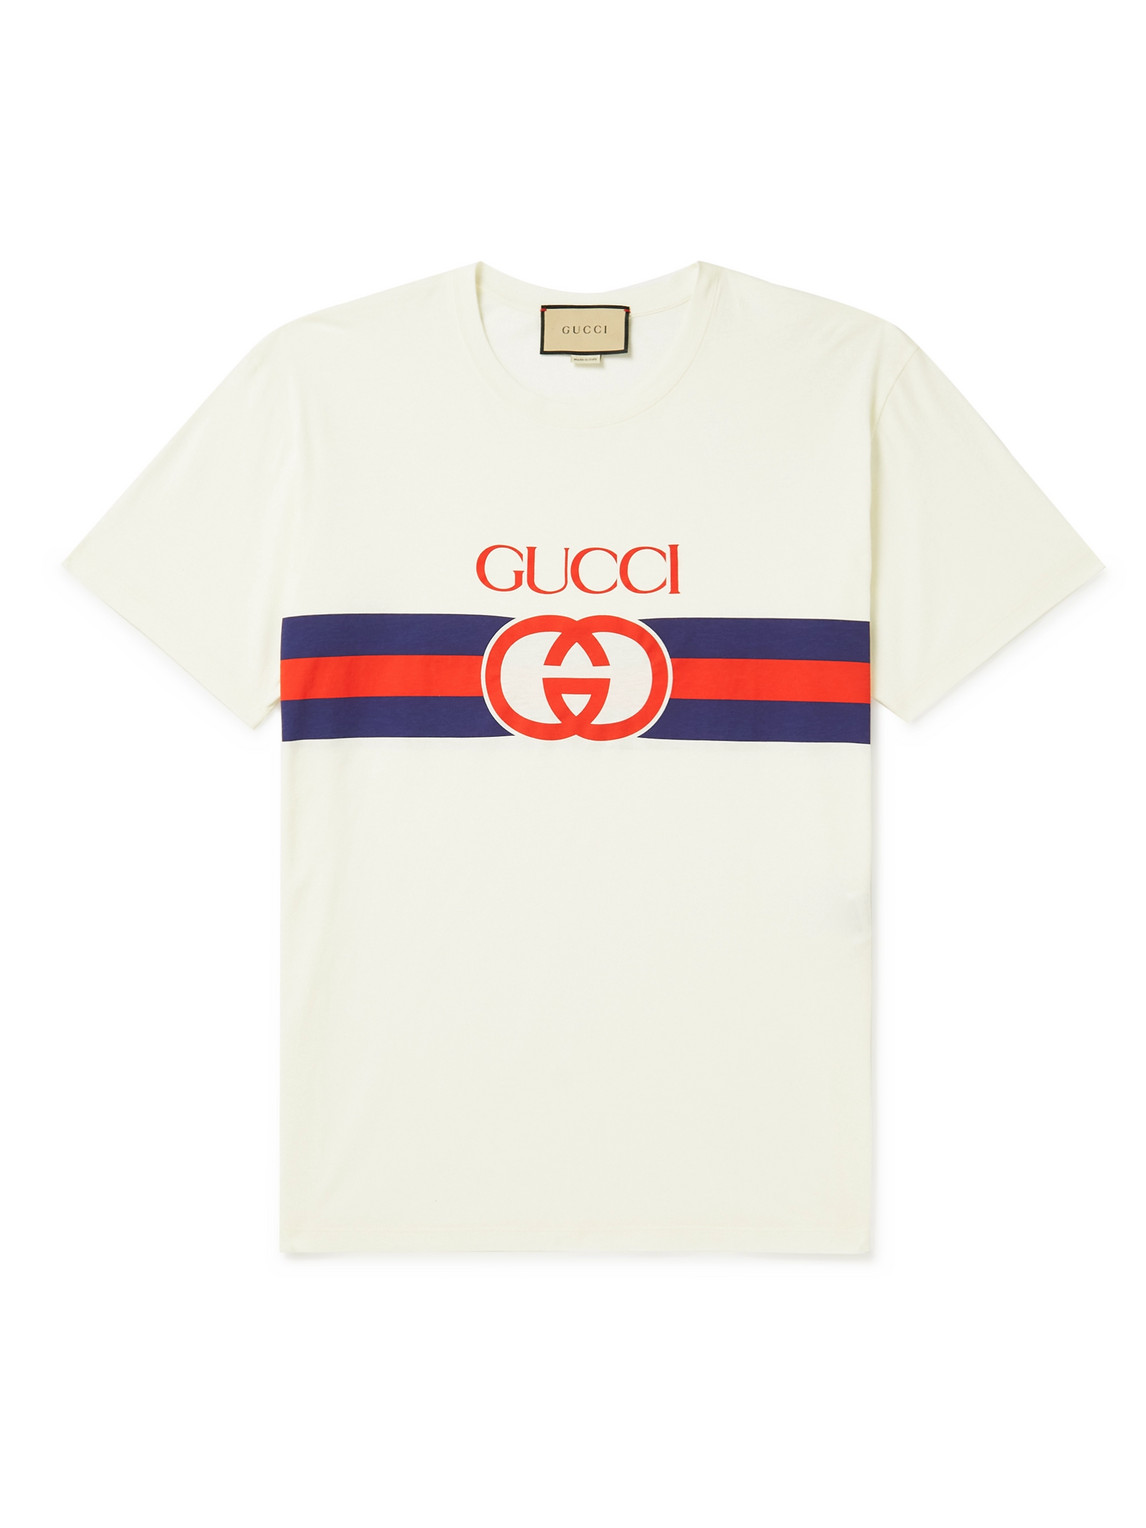 Gucci X The North Face Oversize T-Shirt Black for Men